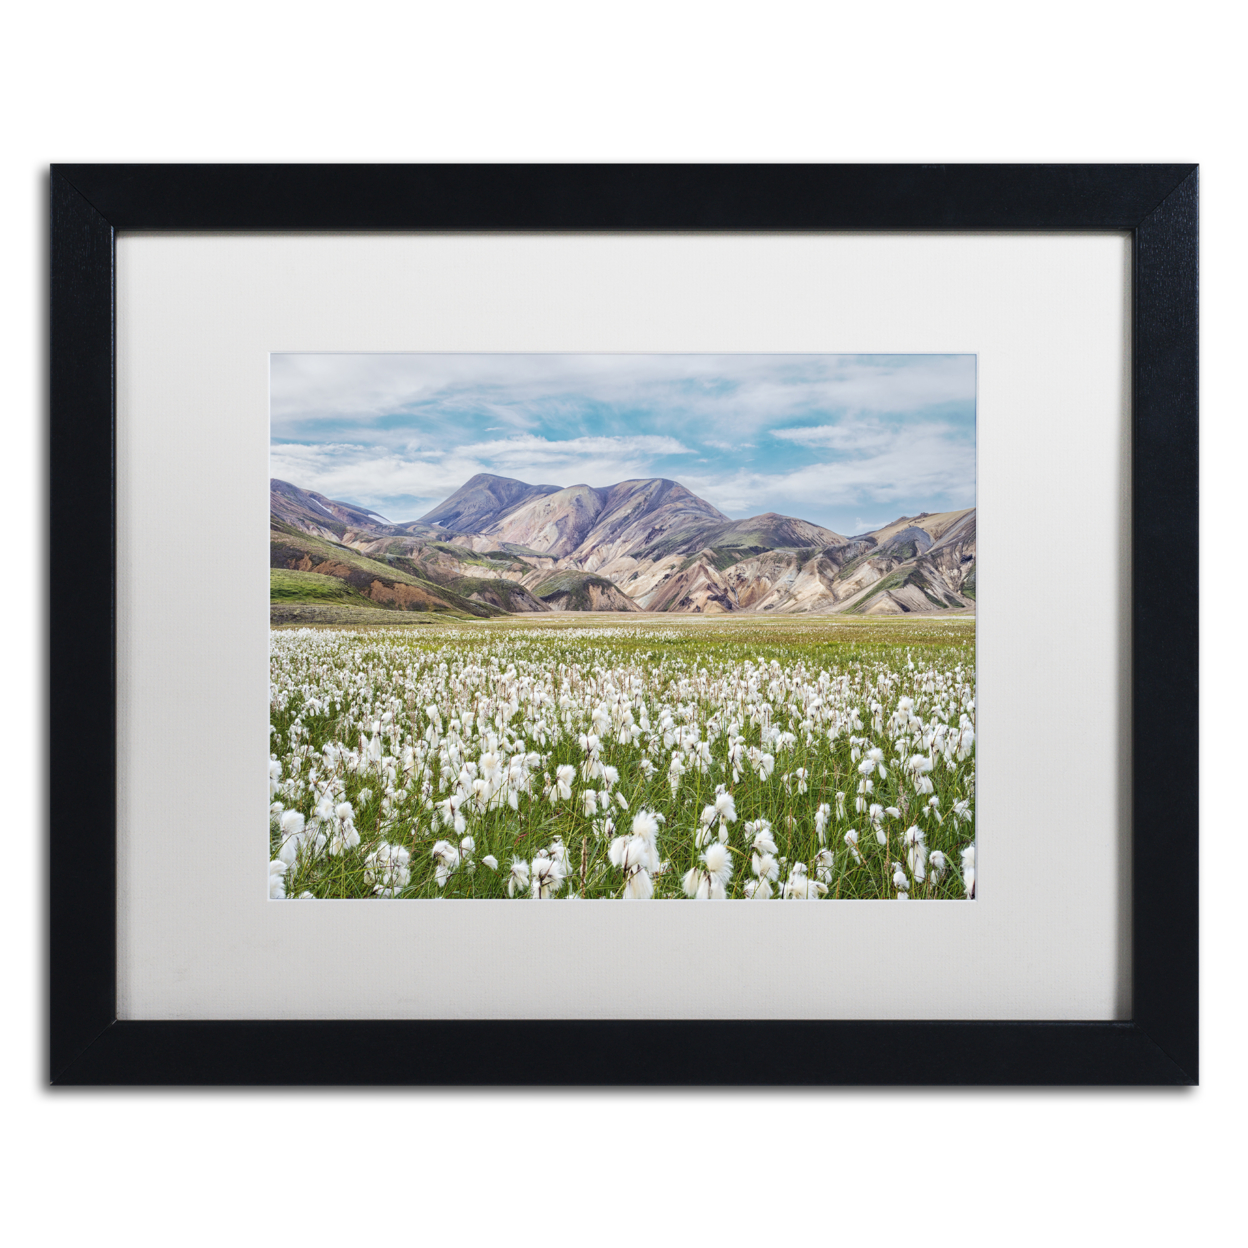 Michael Blanchette Photography 'Cotton Grass' Black Wooden Framed Art 18 X 22 Inches